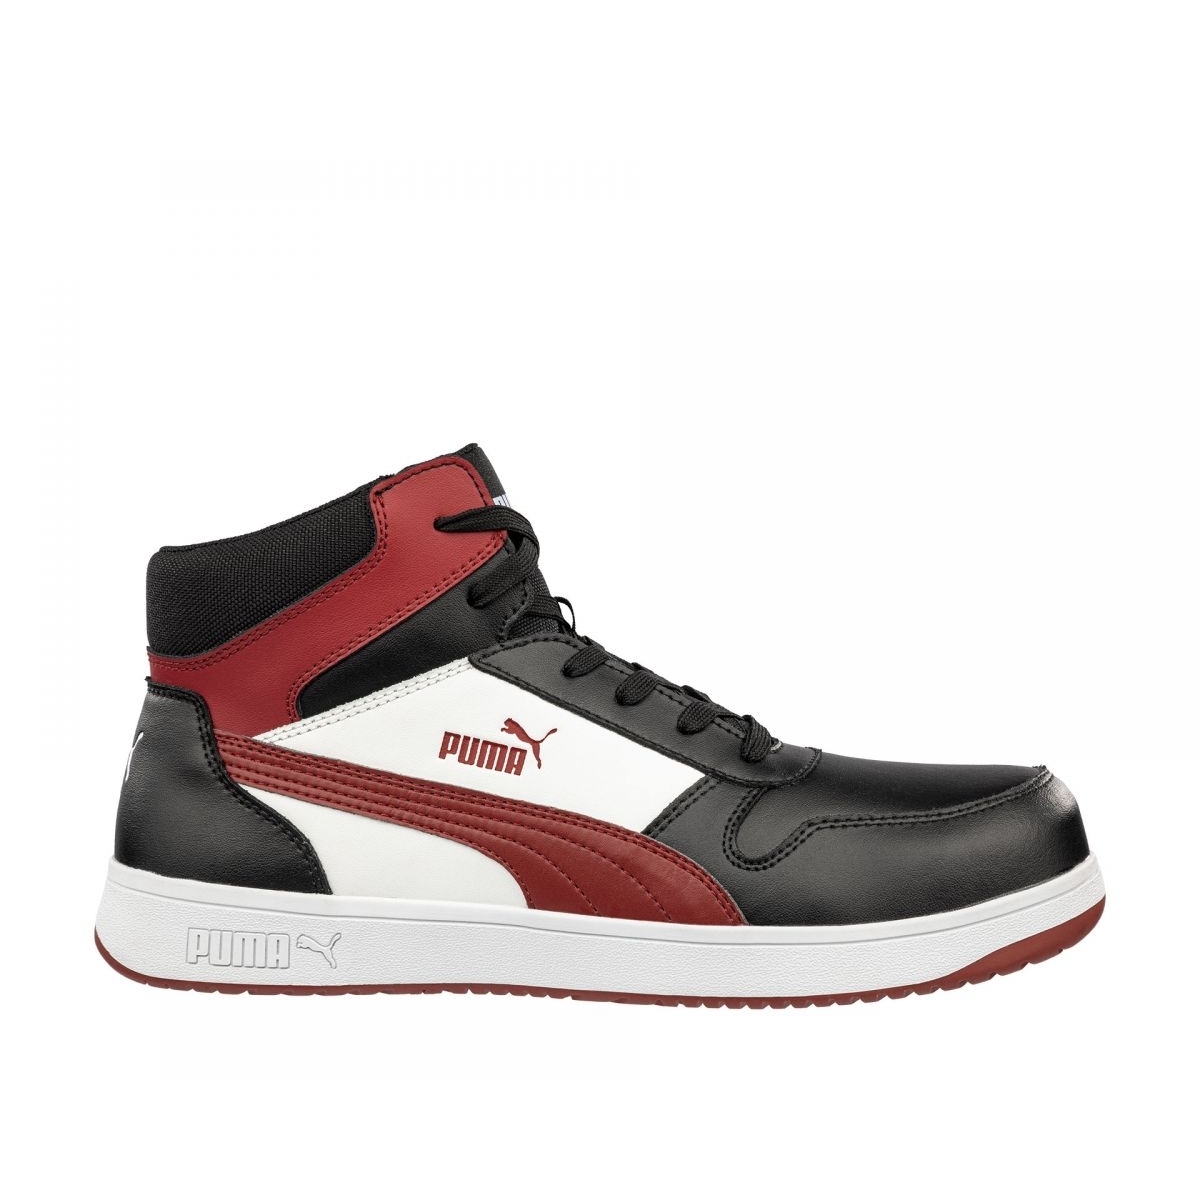 PUMA Safety Men's Frontcourt Mid Composite Toe Waterproof Work Boot Black/White/Red - 630055 BLK/ WHT/RED - BLK/ WHT/RED, 8.5